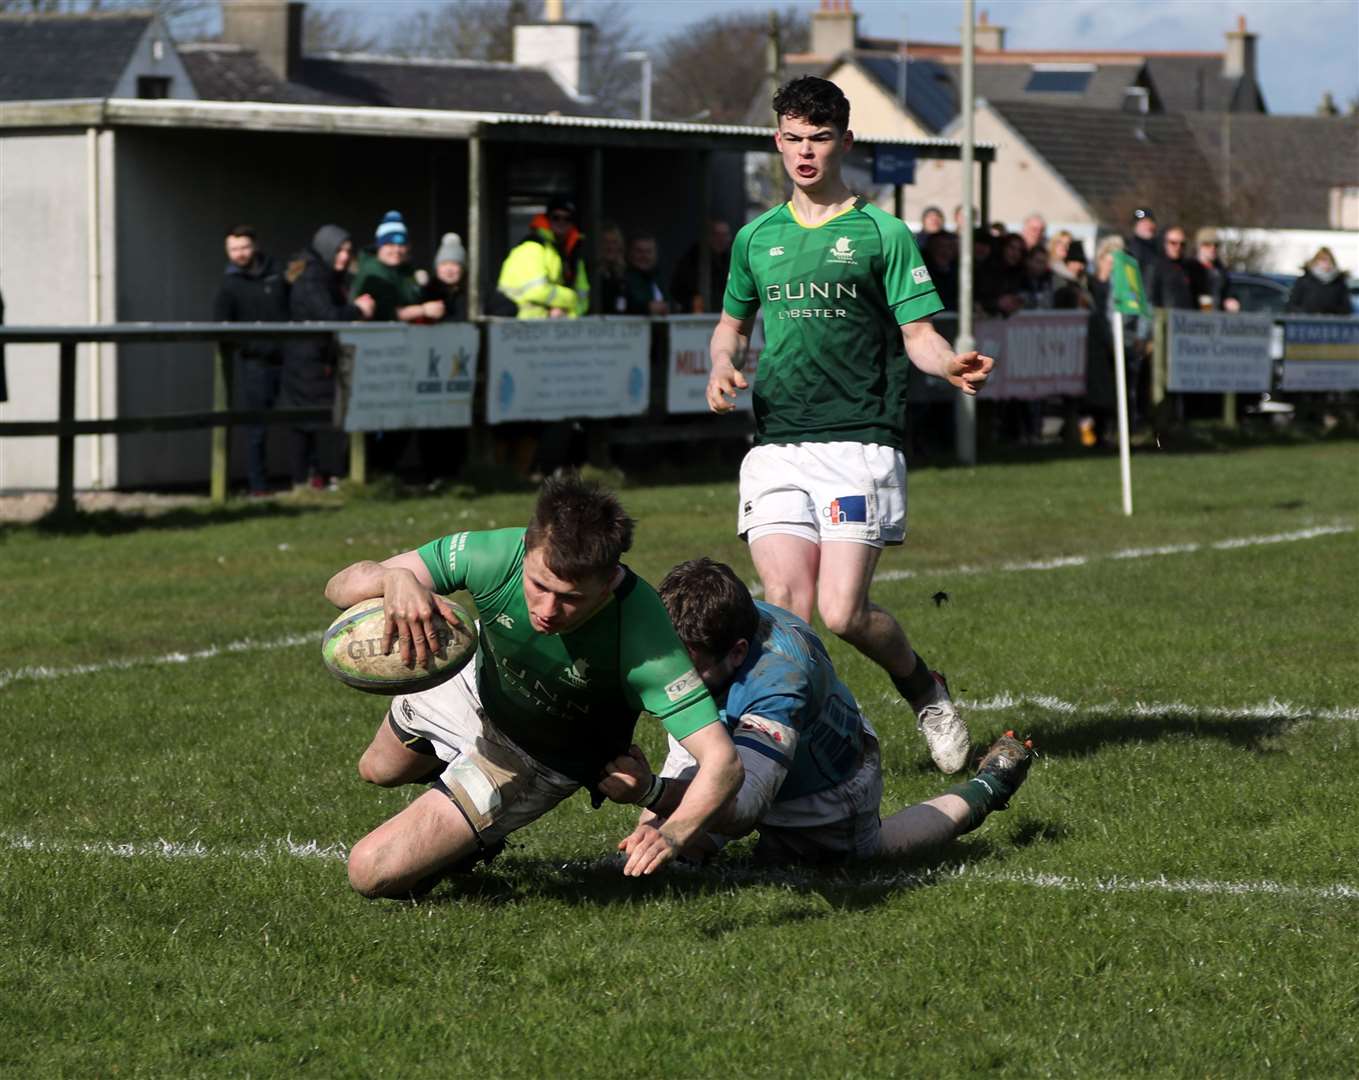 Scott Webster goes over for a try against Blairgowrie at Millbank. Picture: James Gunn